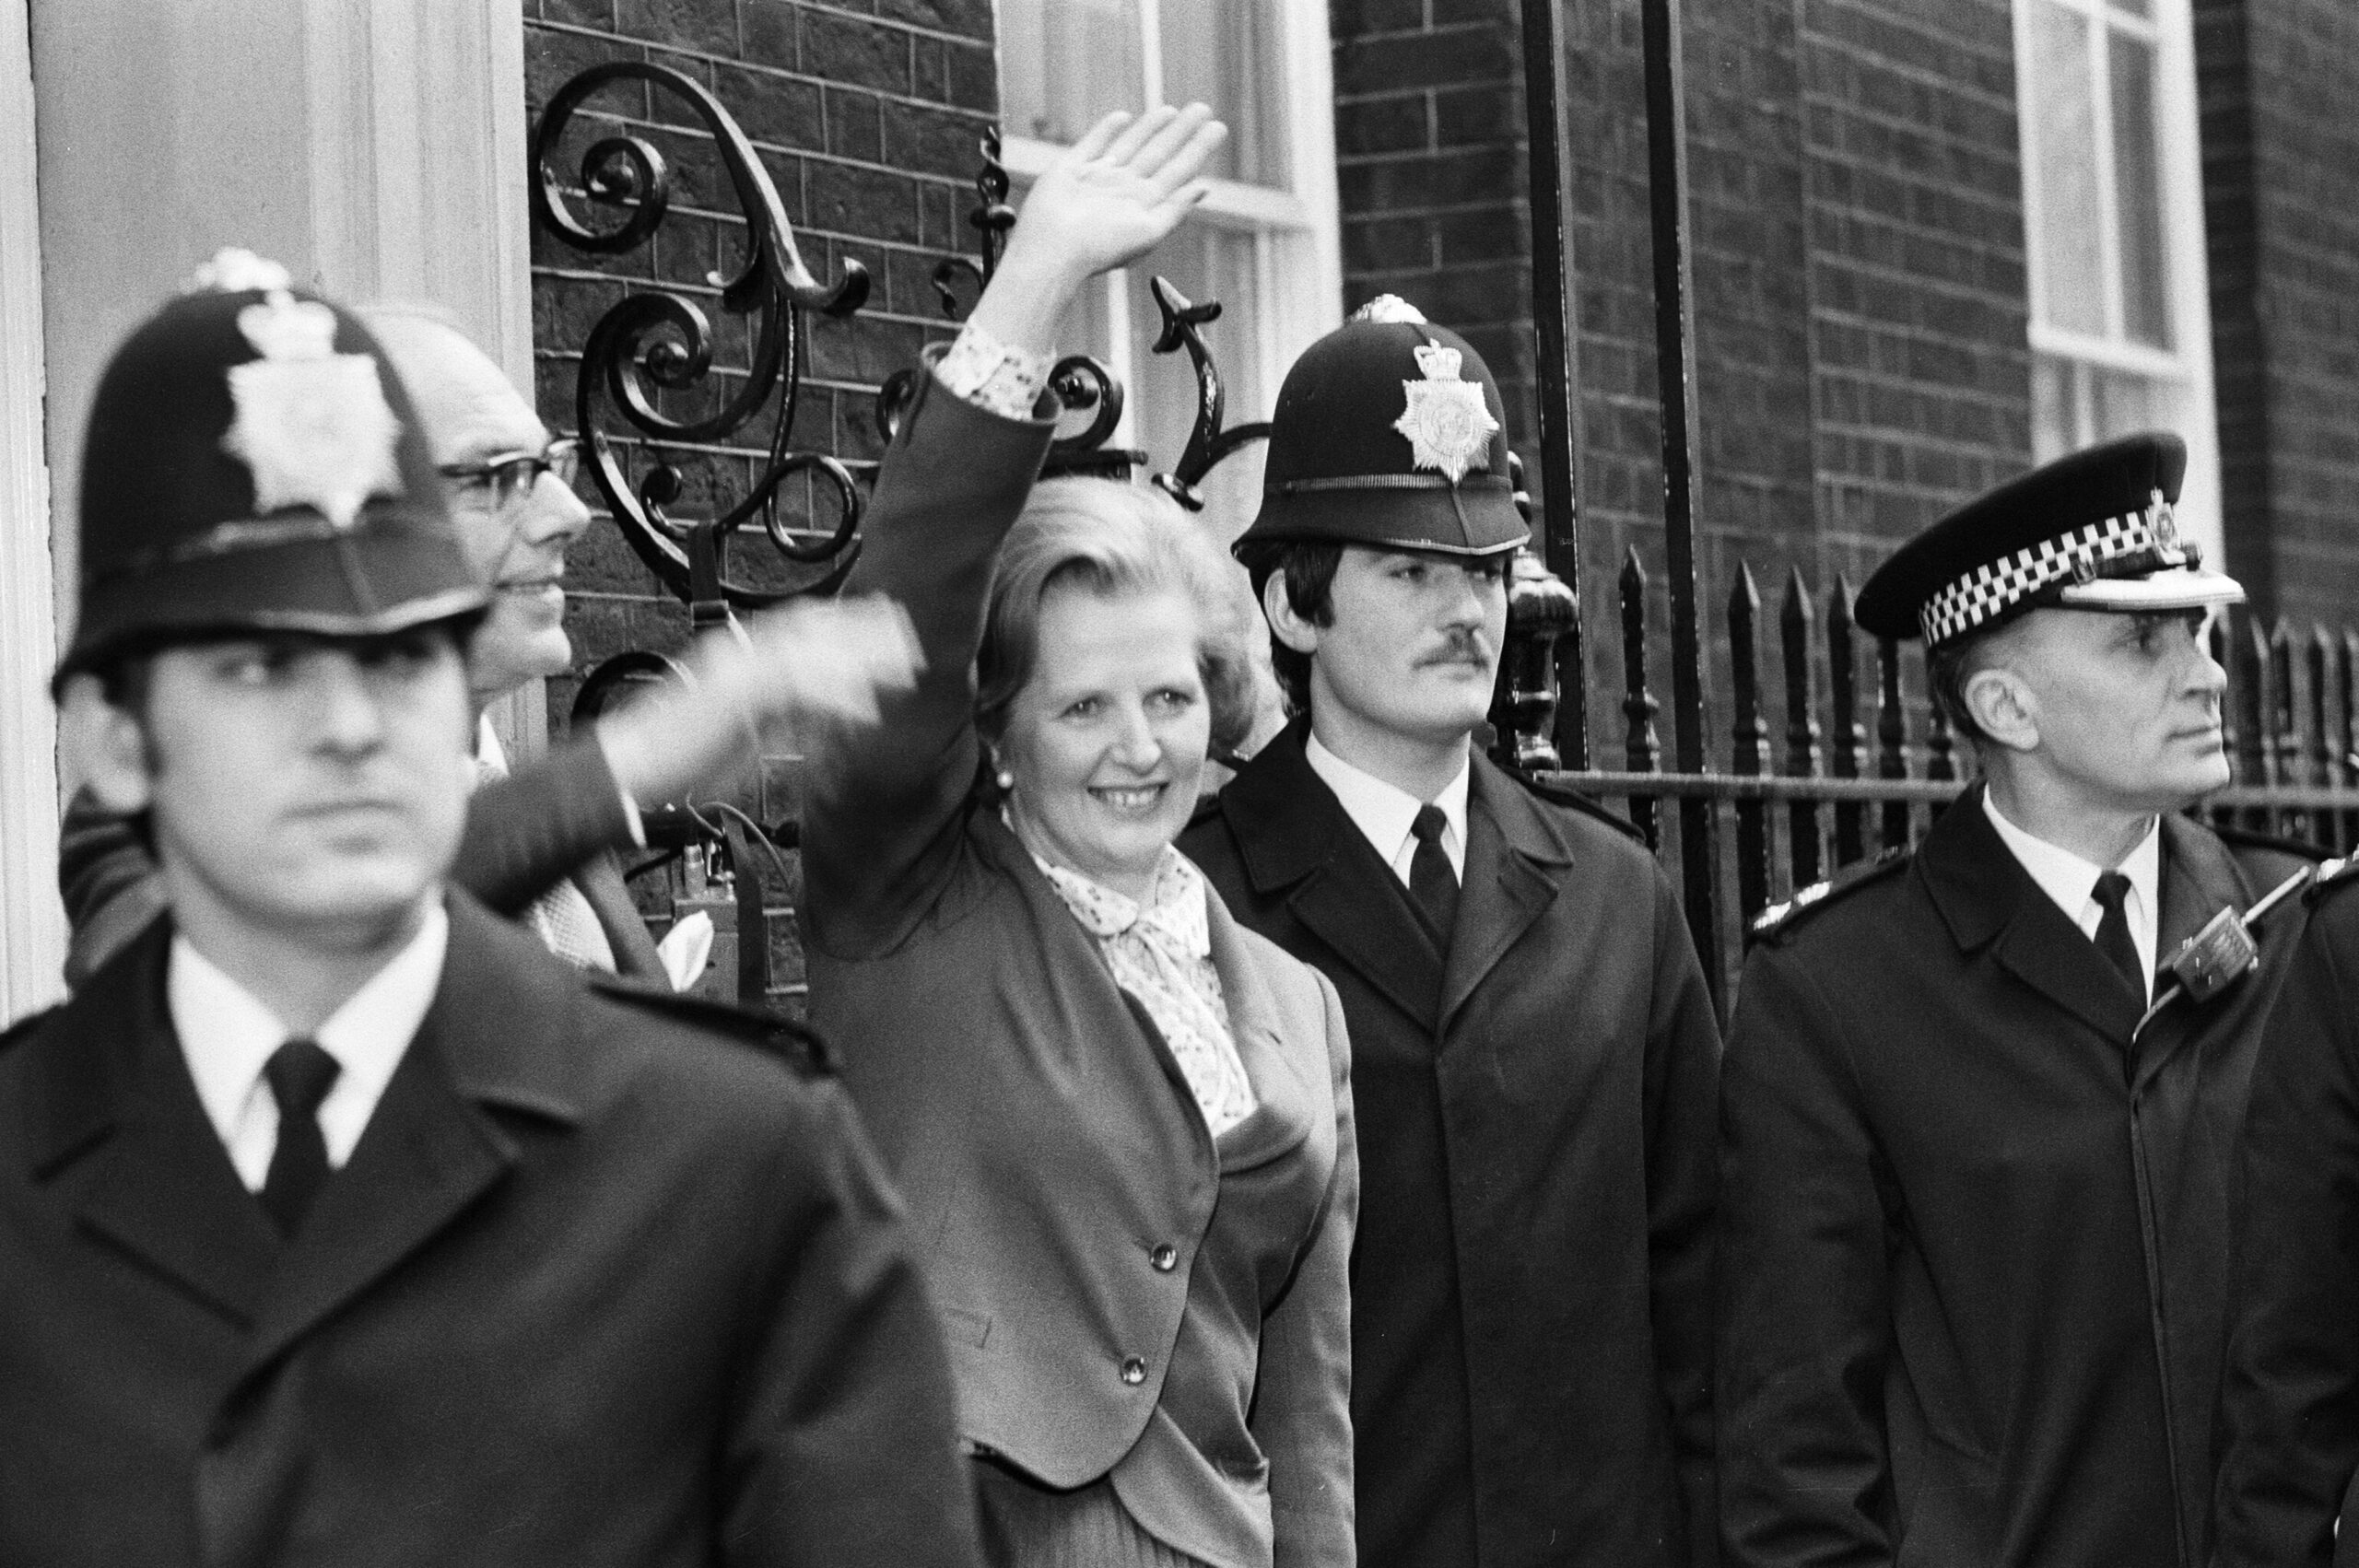 Margaret Thatcher enters Number 10 Downing Street after her historic election victory, becoming Britain's first female Prime Minister. 4th May 1979. (Photo Credit: MacDonald and Ley and Foster/Mirrorpix/Getty Images)